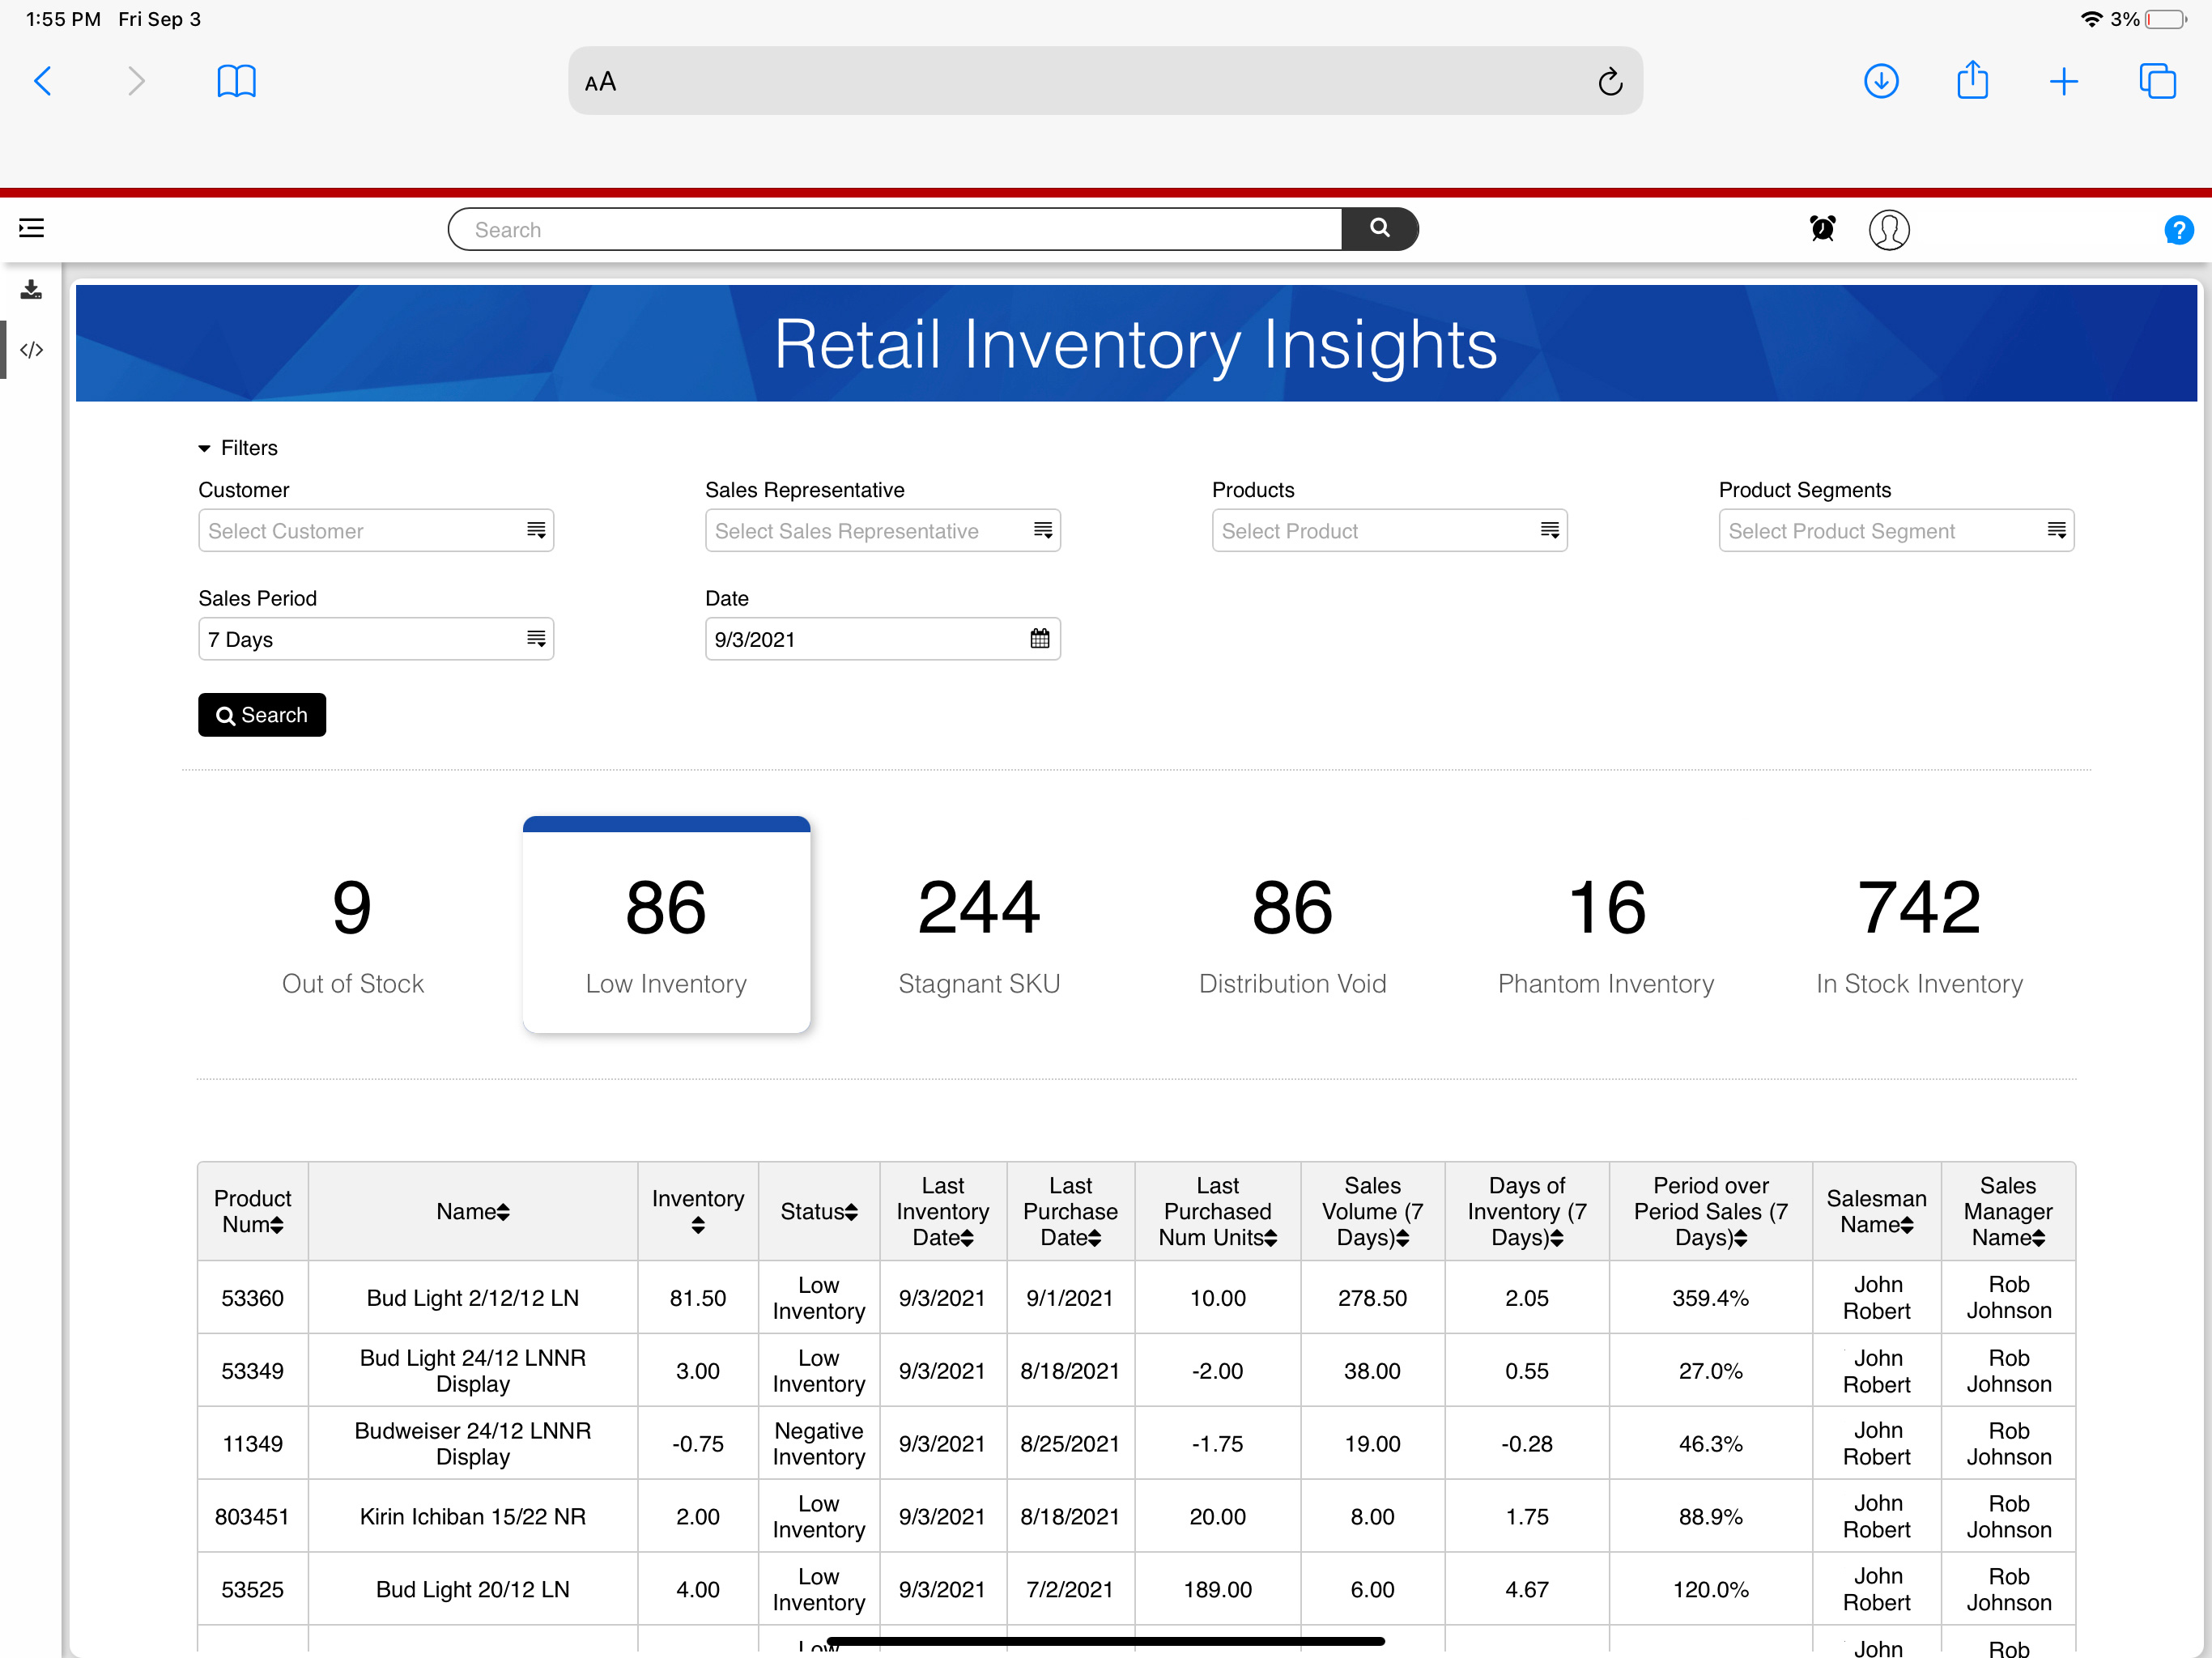 Retail Inventory Insights